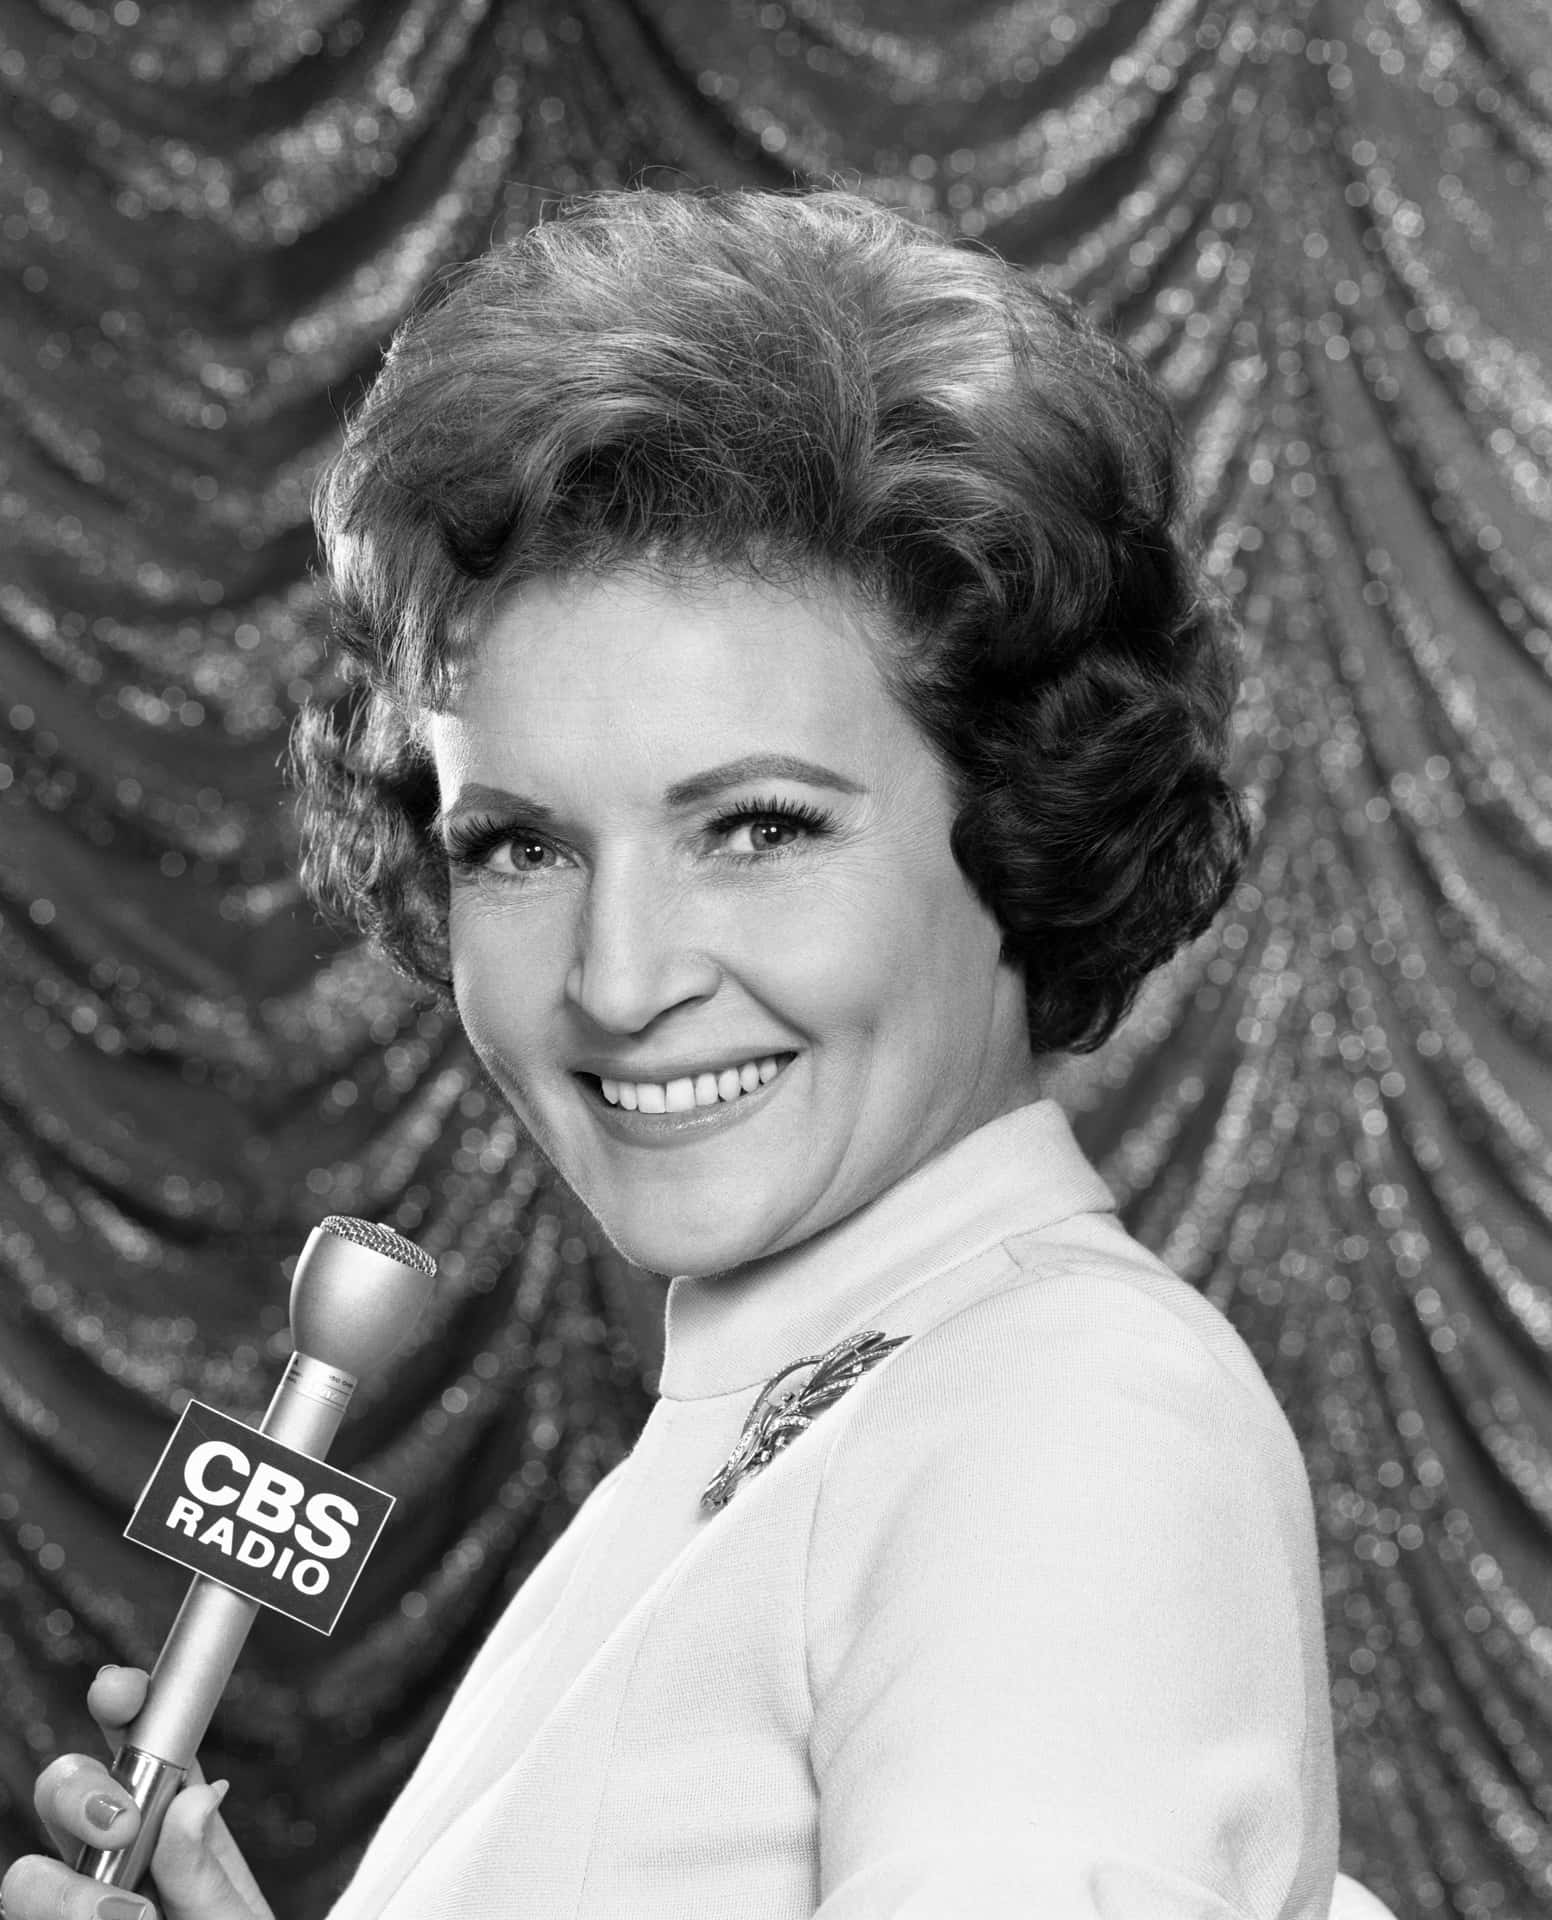 Caption: The evergreen smile of Betty White